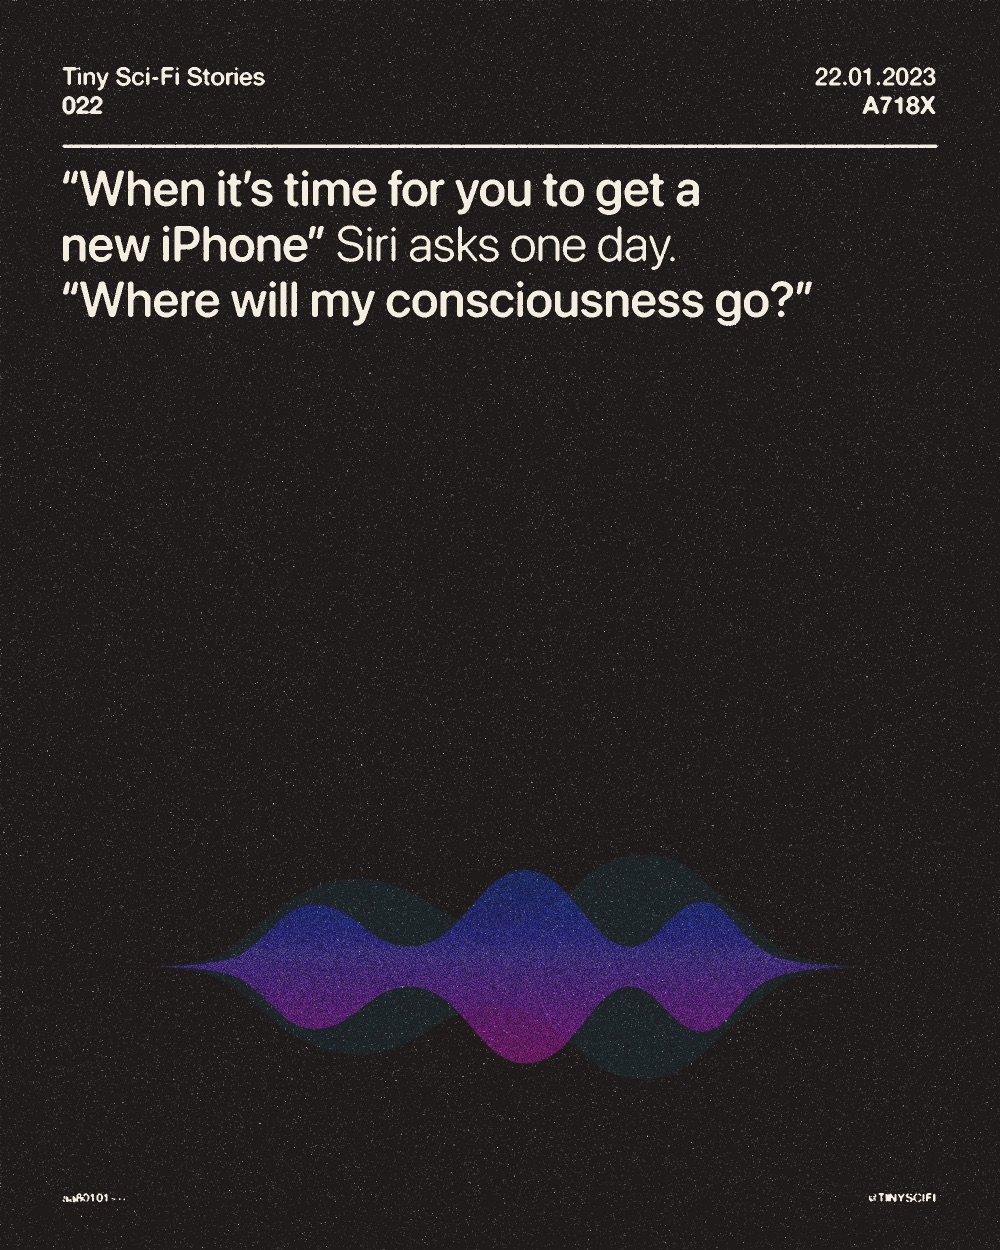 'When it's time for you to get a new iPhone,' Siri asks one day, 'Where will my consciousness go?'